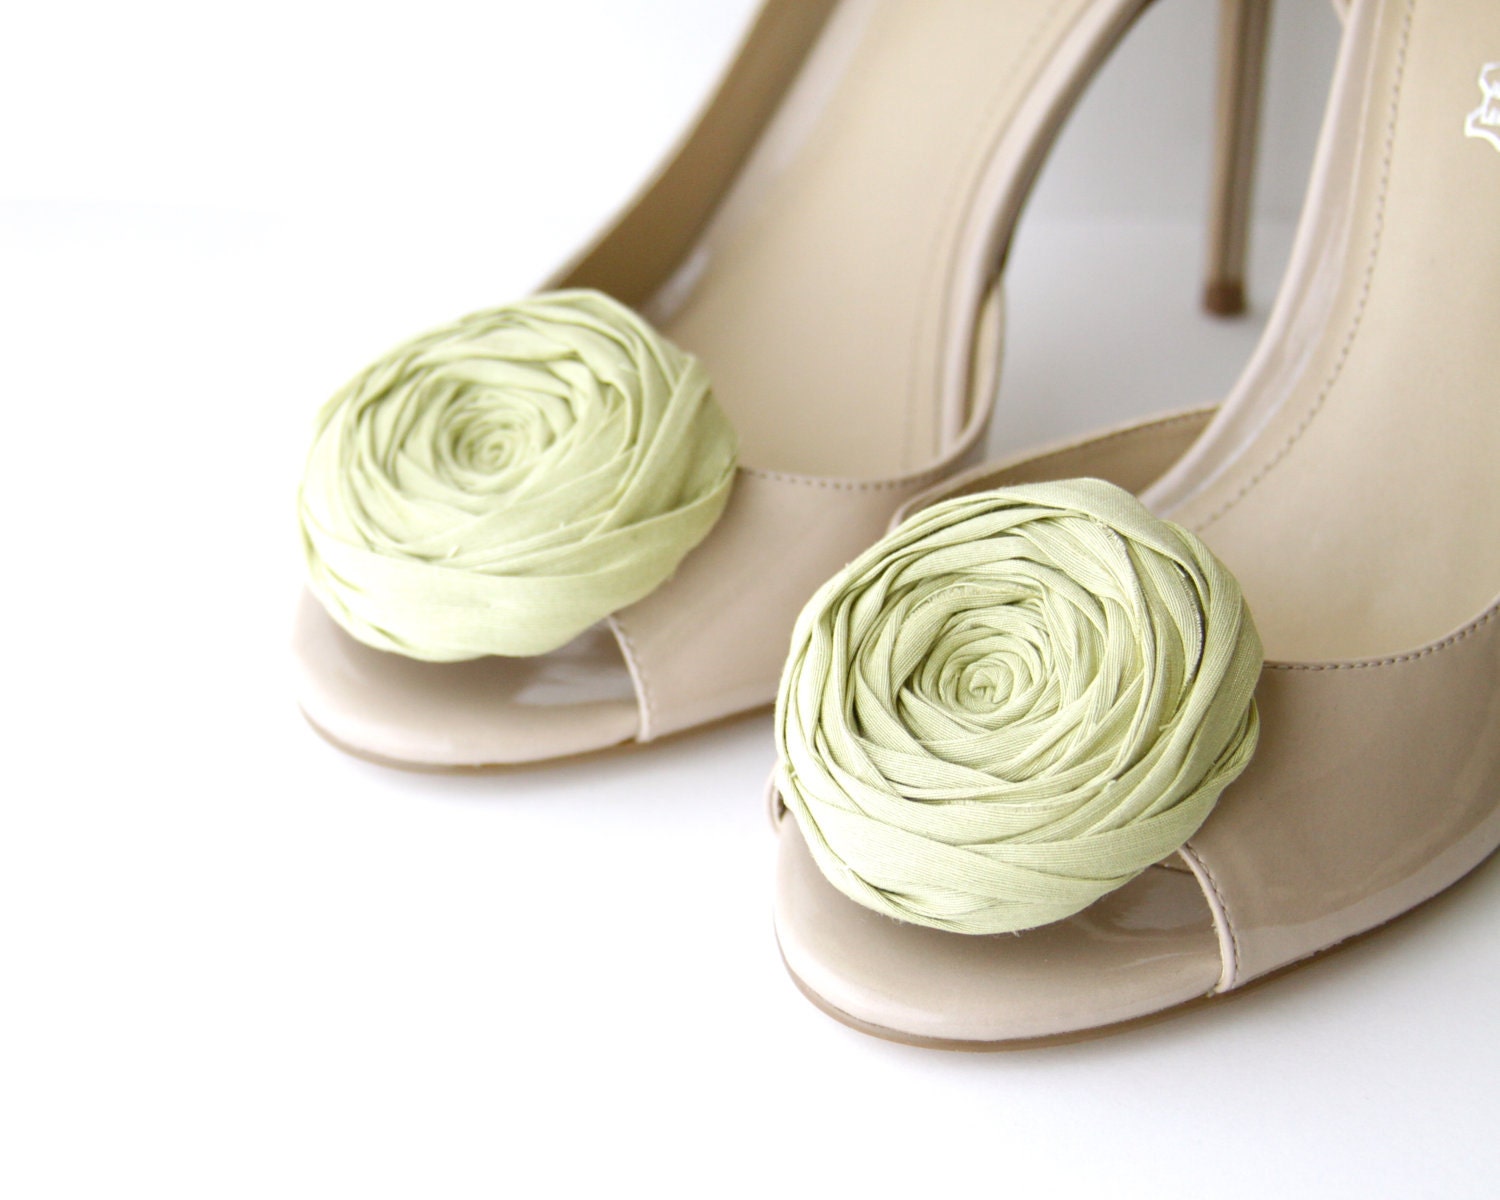 Rosette Shoe Clips Tea Green Bridal Party Bridesmaid and Beyond Silk Flower Shoe Clips with Bluette Clips Ready to Ship 2.25 inches - Brydferth